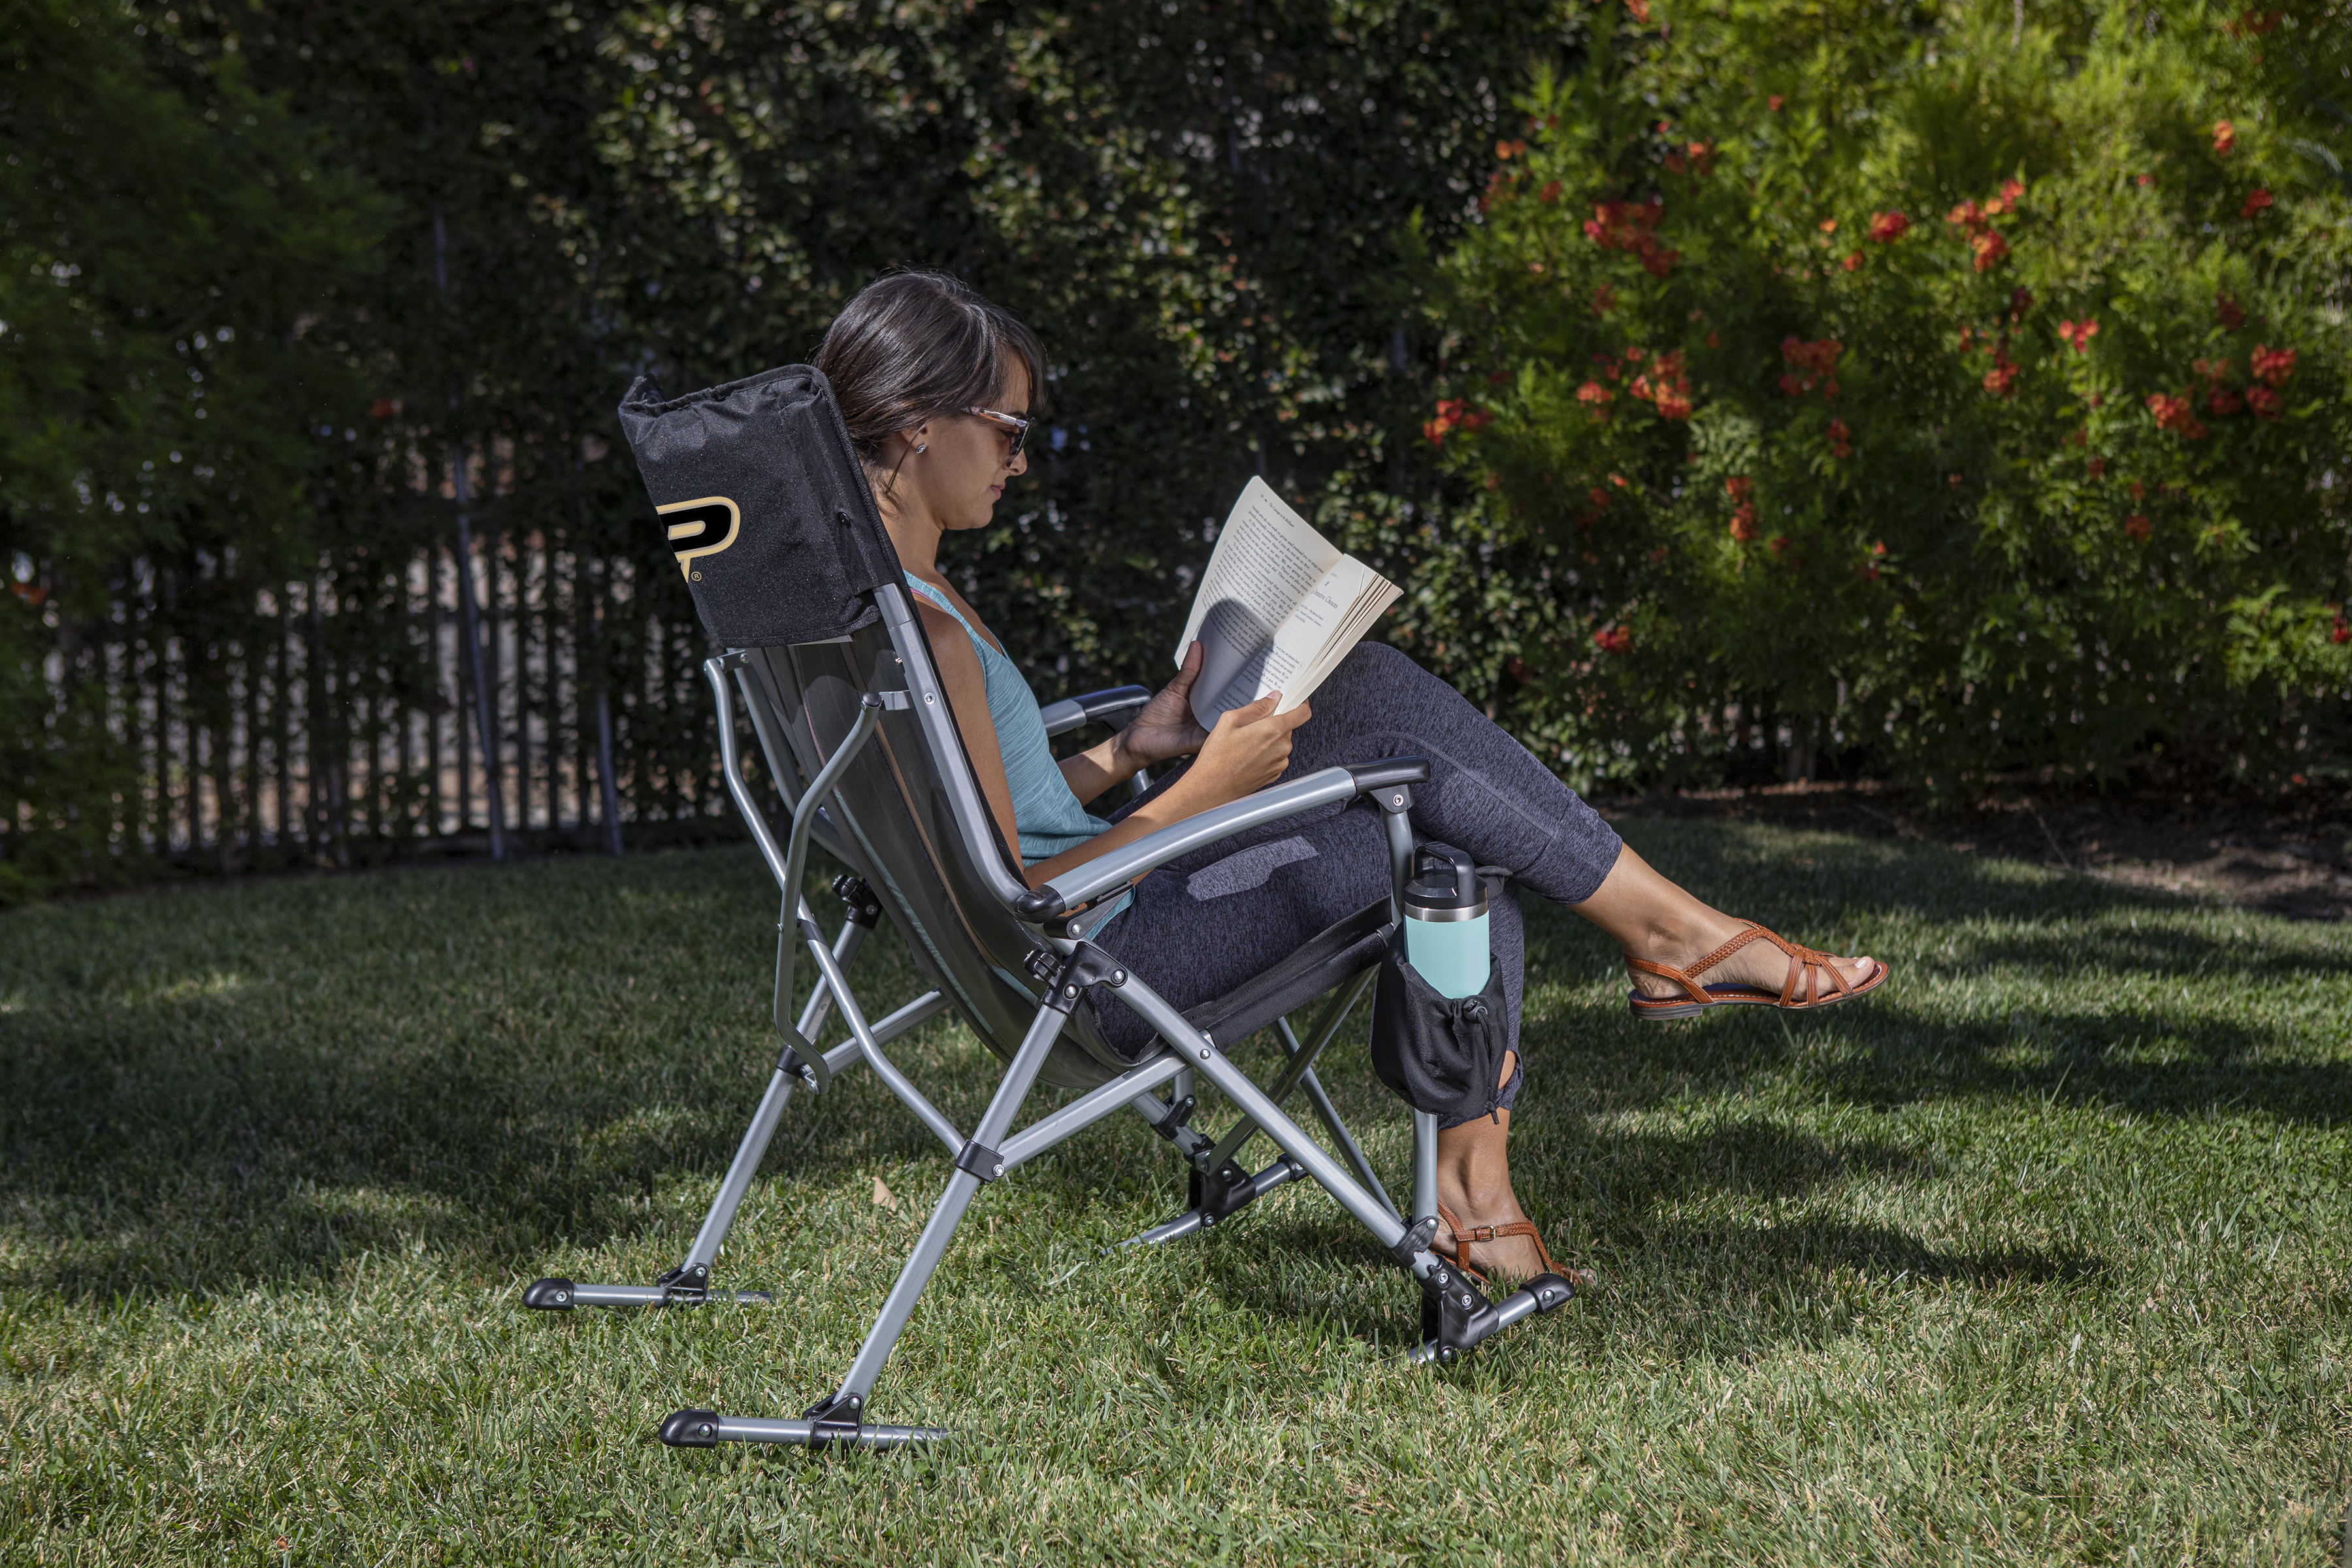 Purdue Boilermakers - Outdoor Rocking Camp Chair